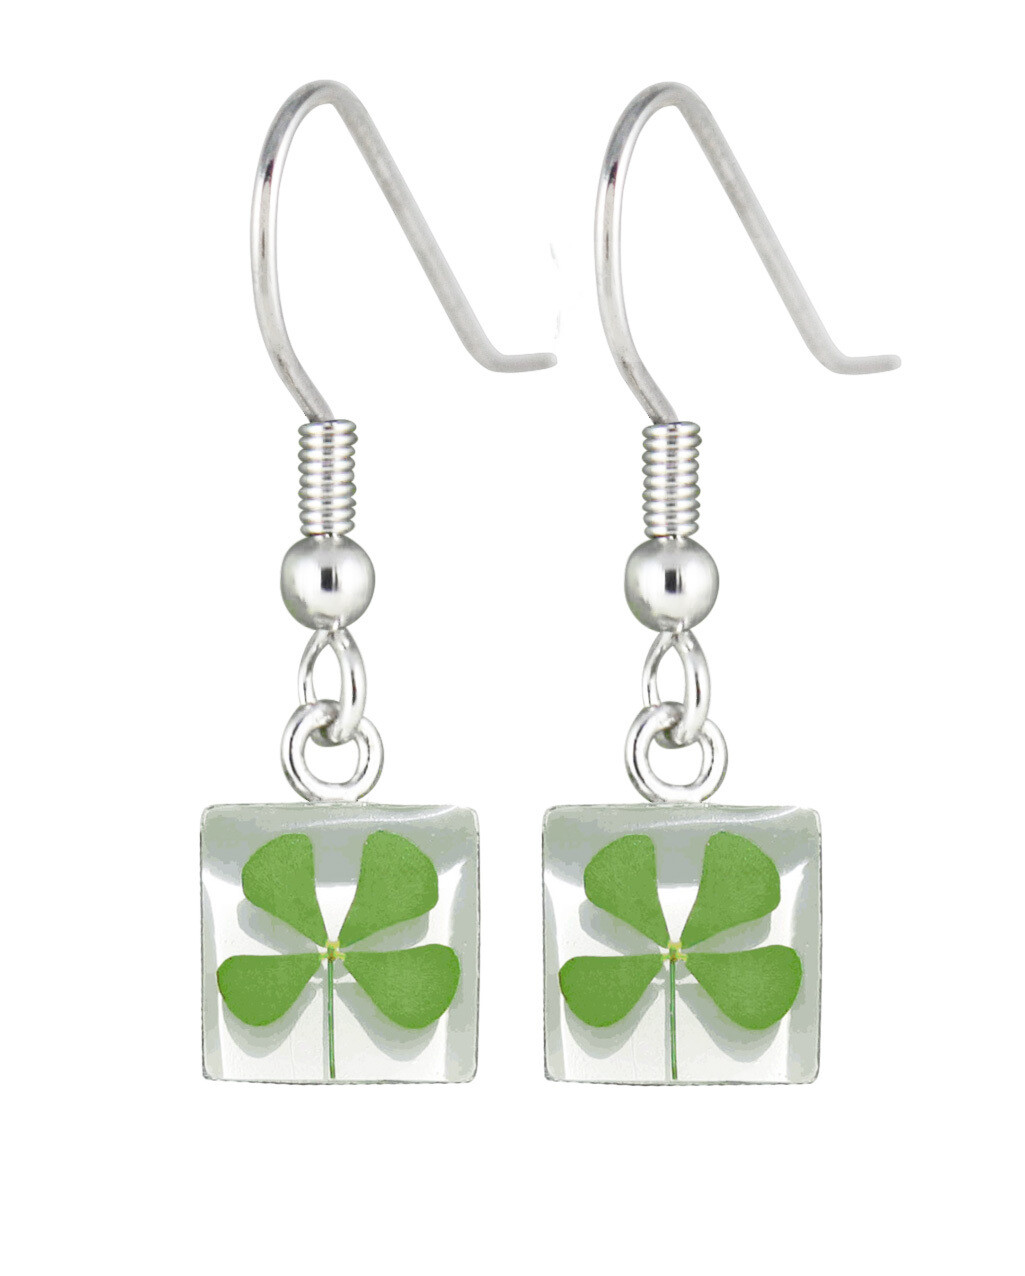 Four-Leaf Clover, Square Hanging Earrings, White Background.